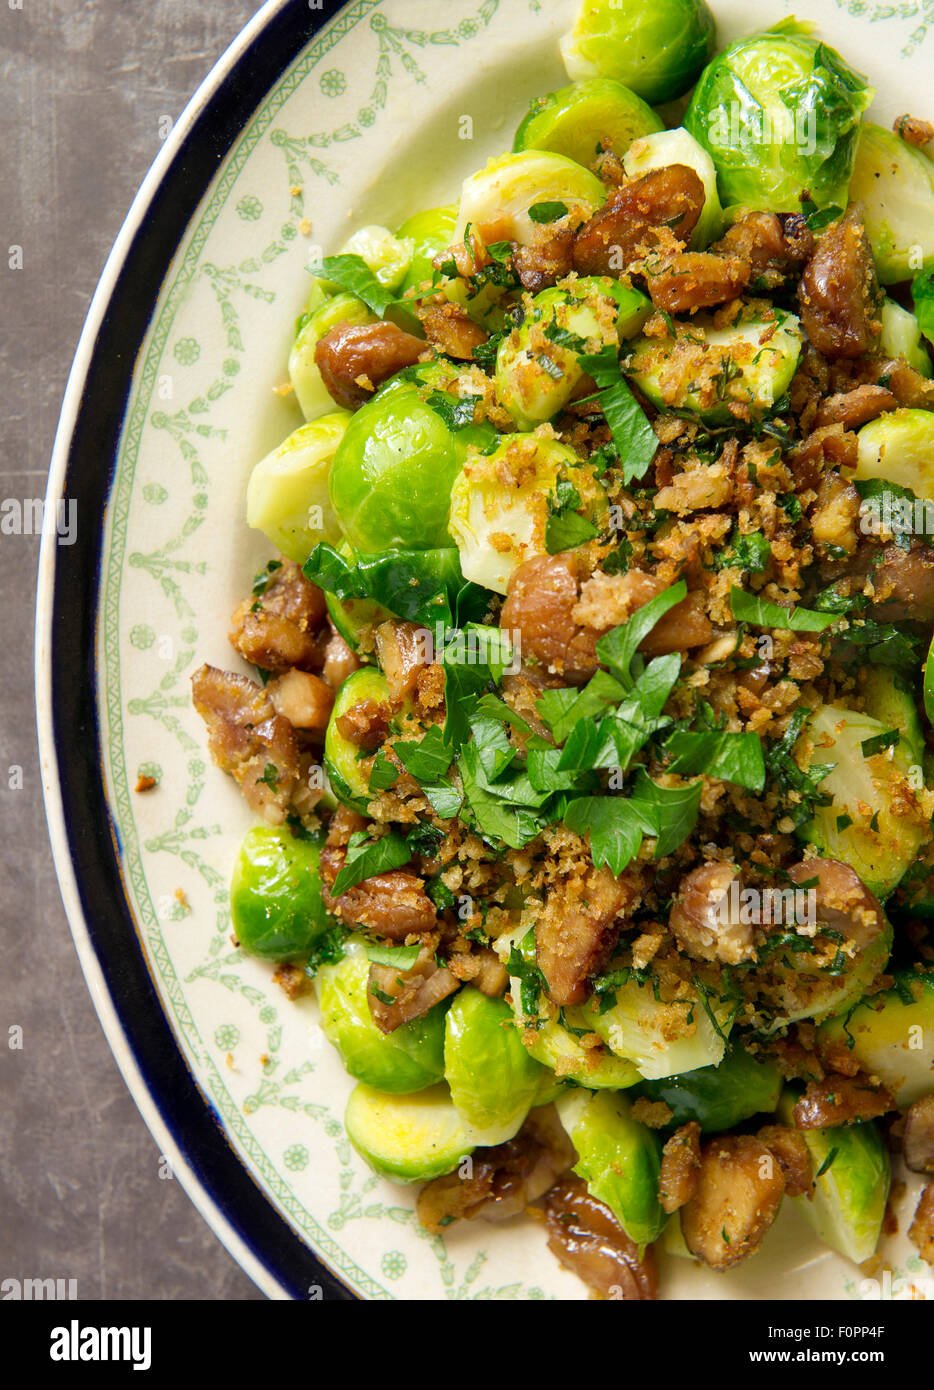 Brussels sprouts with lemon crumbs and chestnuts. Stock Photo